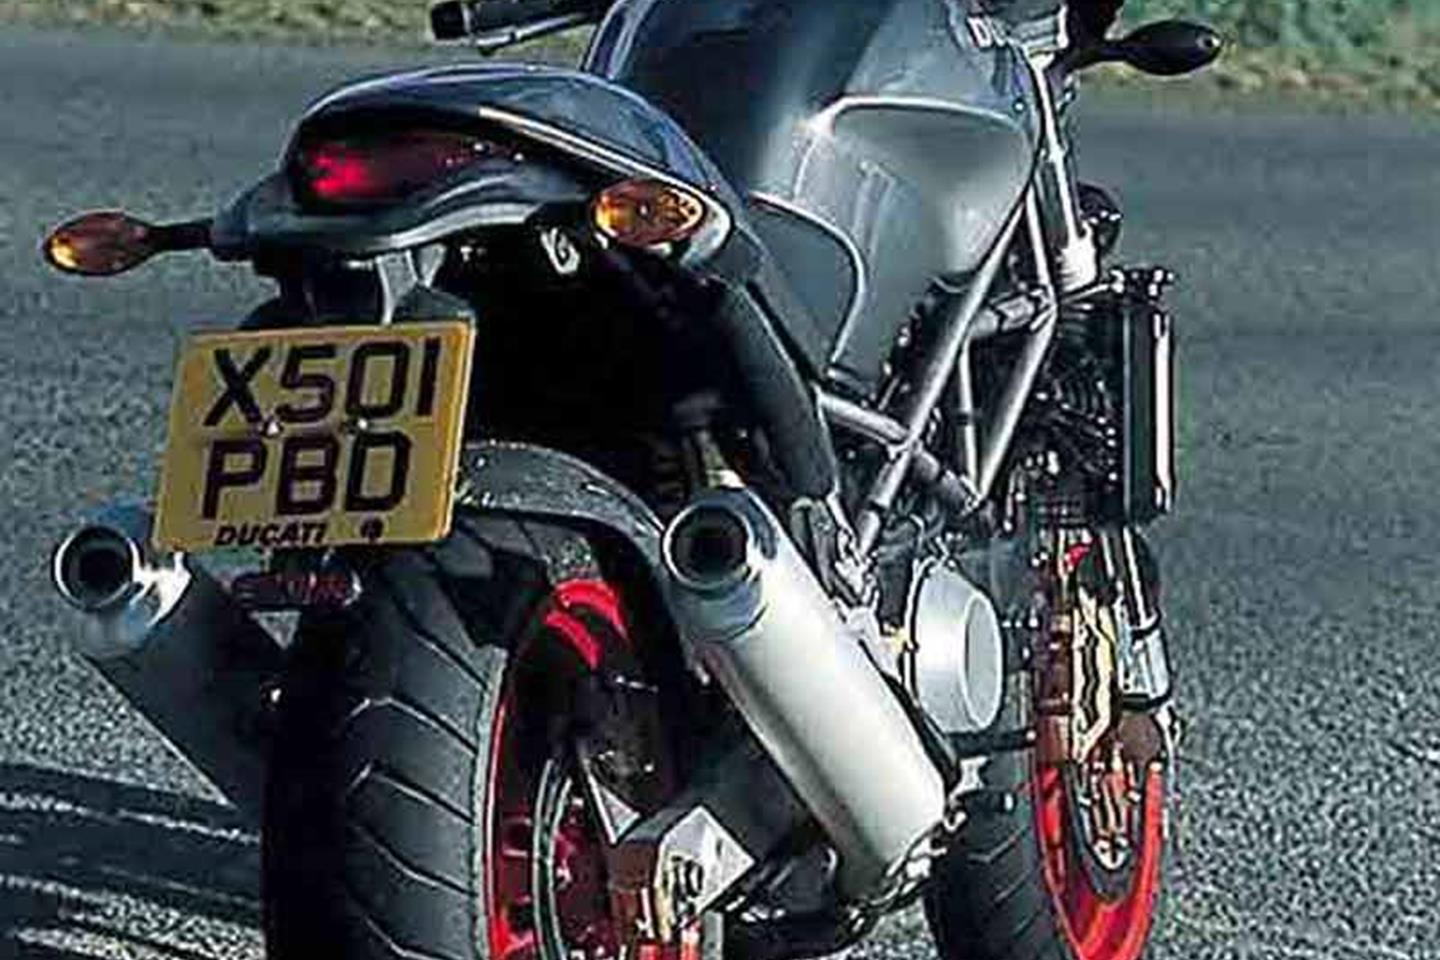 DUCATI MONSTER S4 (2001-2007) Review | Specs & Prices